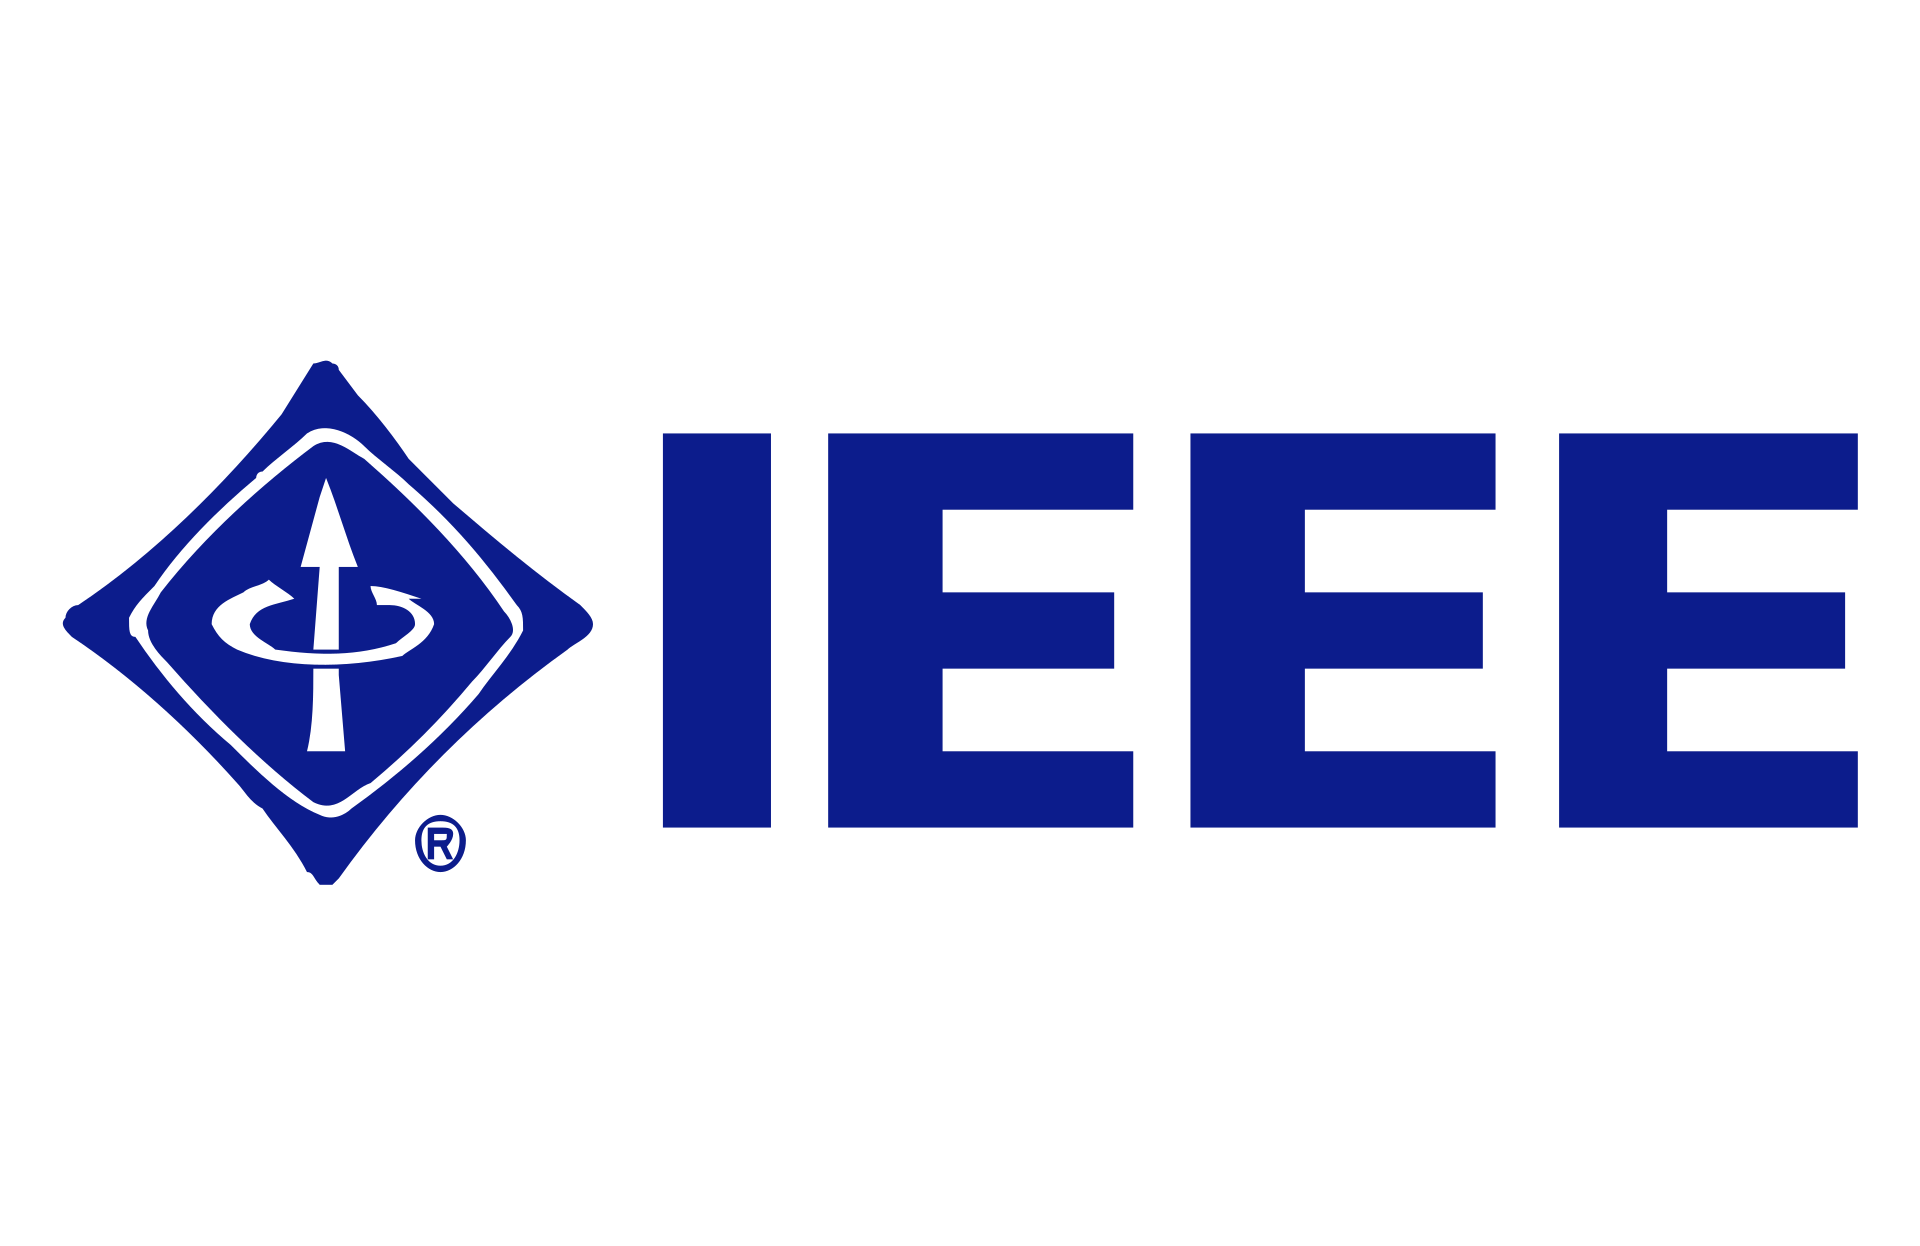 IEEE published